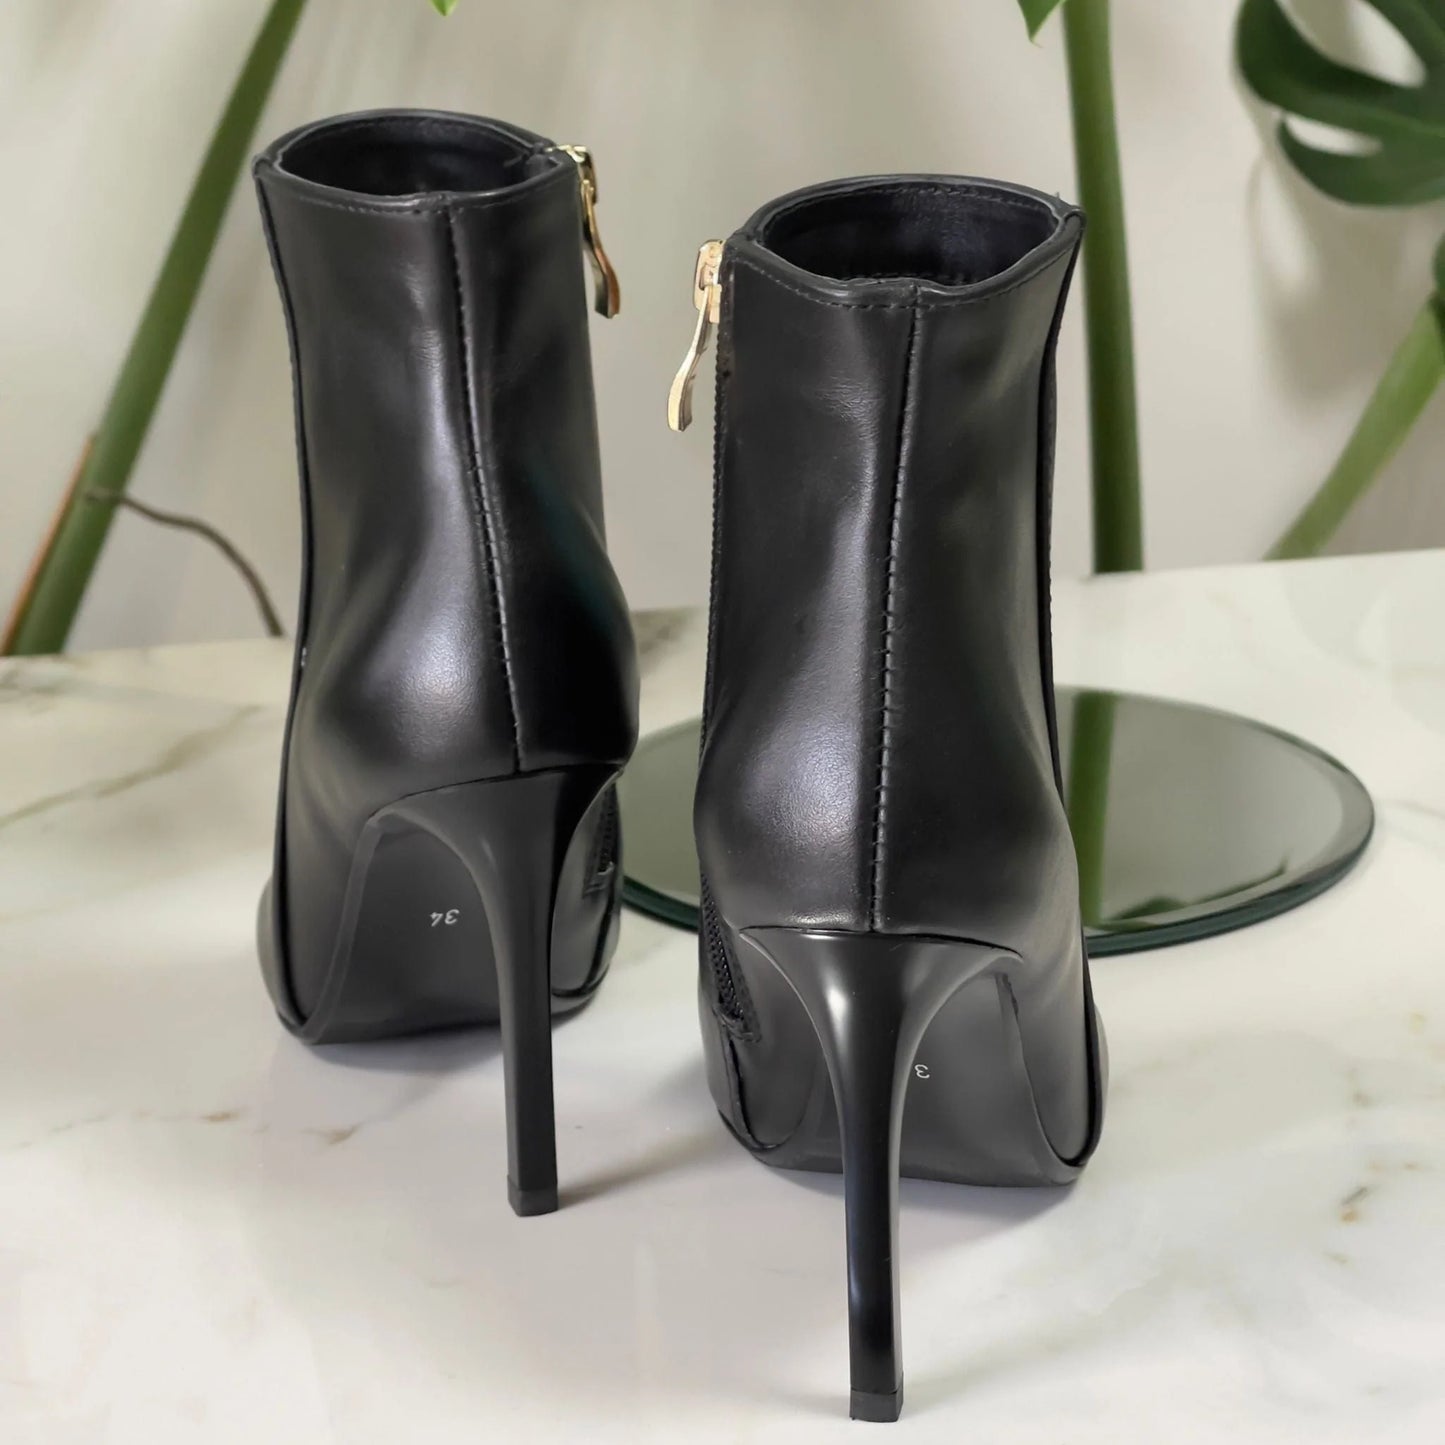 Small size ladies ankle boots in black leather